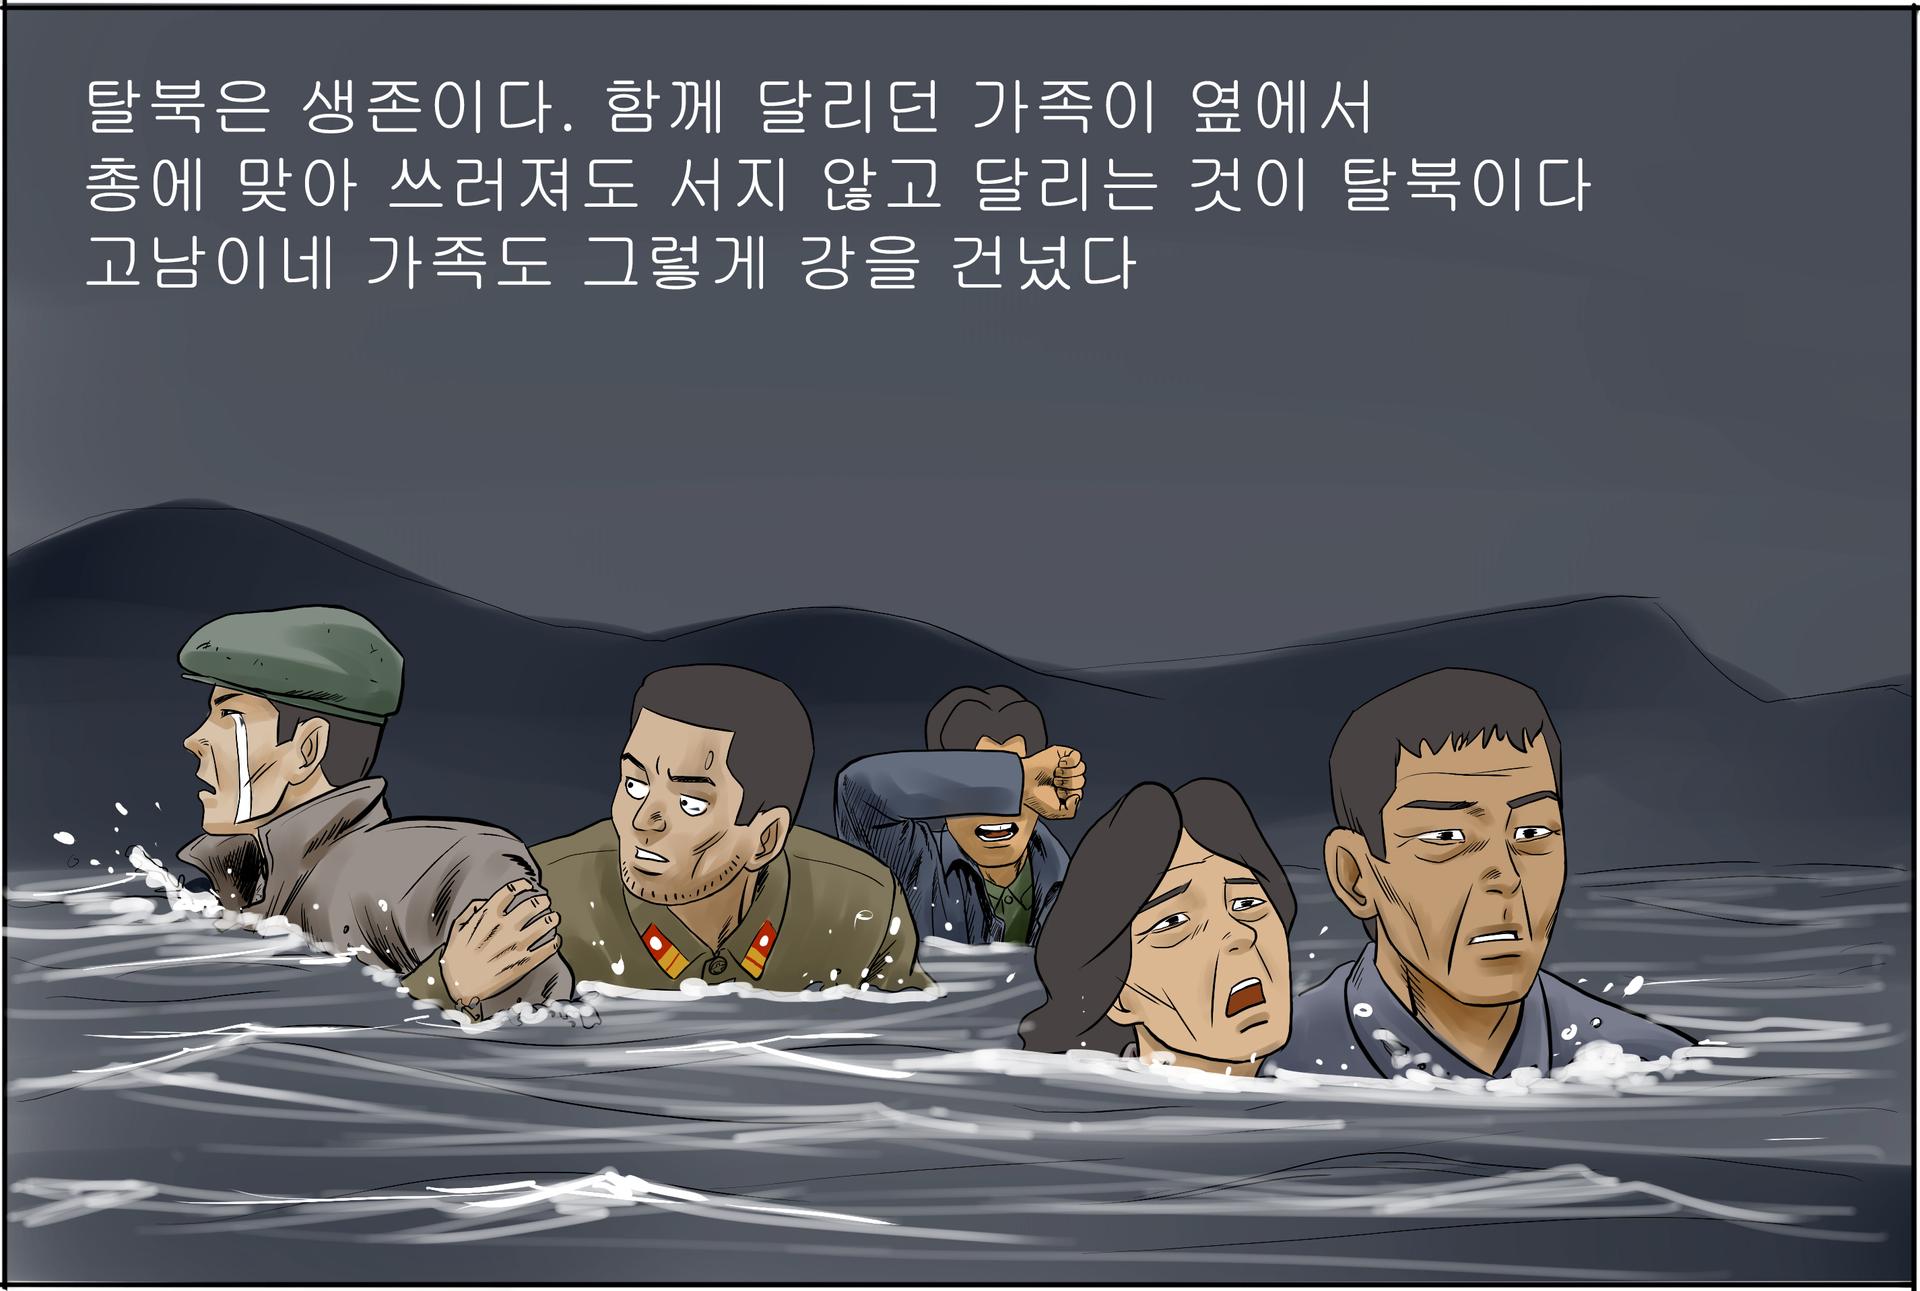 A Choi Seong-gok cartoon depicting refugees trying to swim to safety.